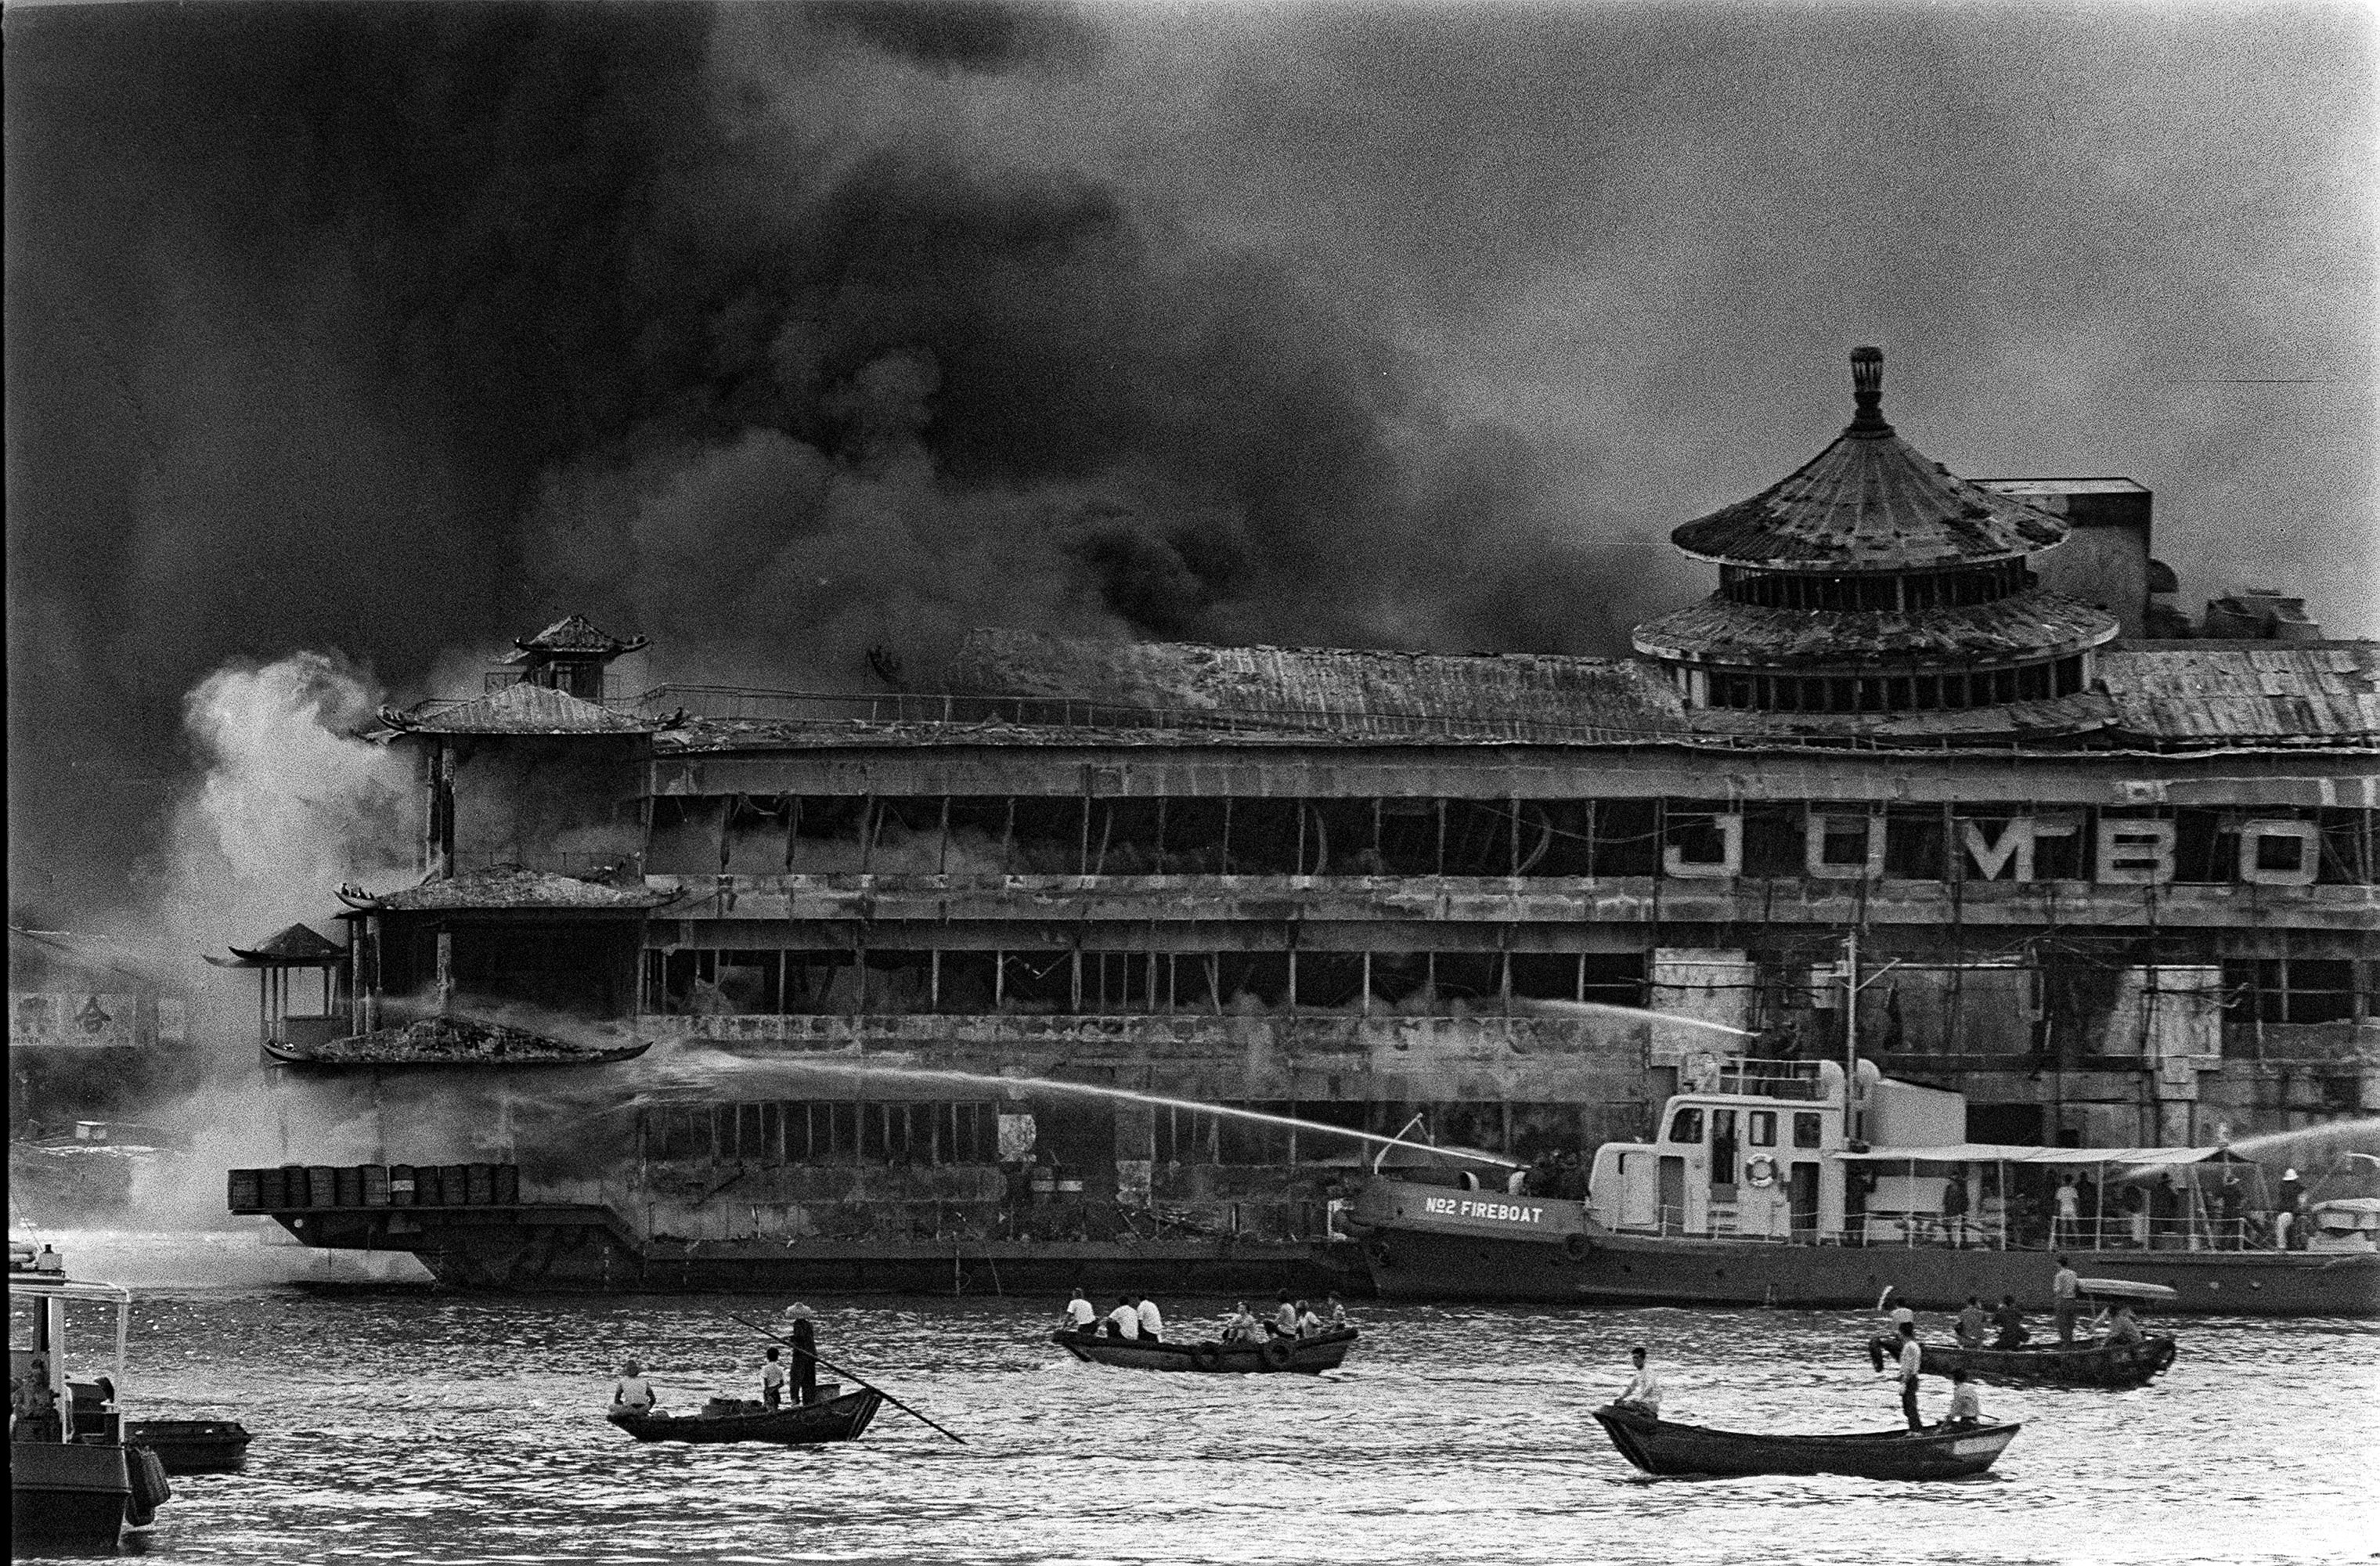 The Jumbo Floating Restaurant is engulfed in flames in 1971 before its scheduled opening. Photo: C. Y. Yu